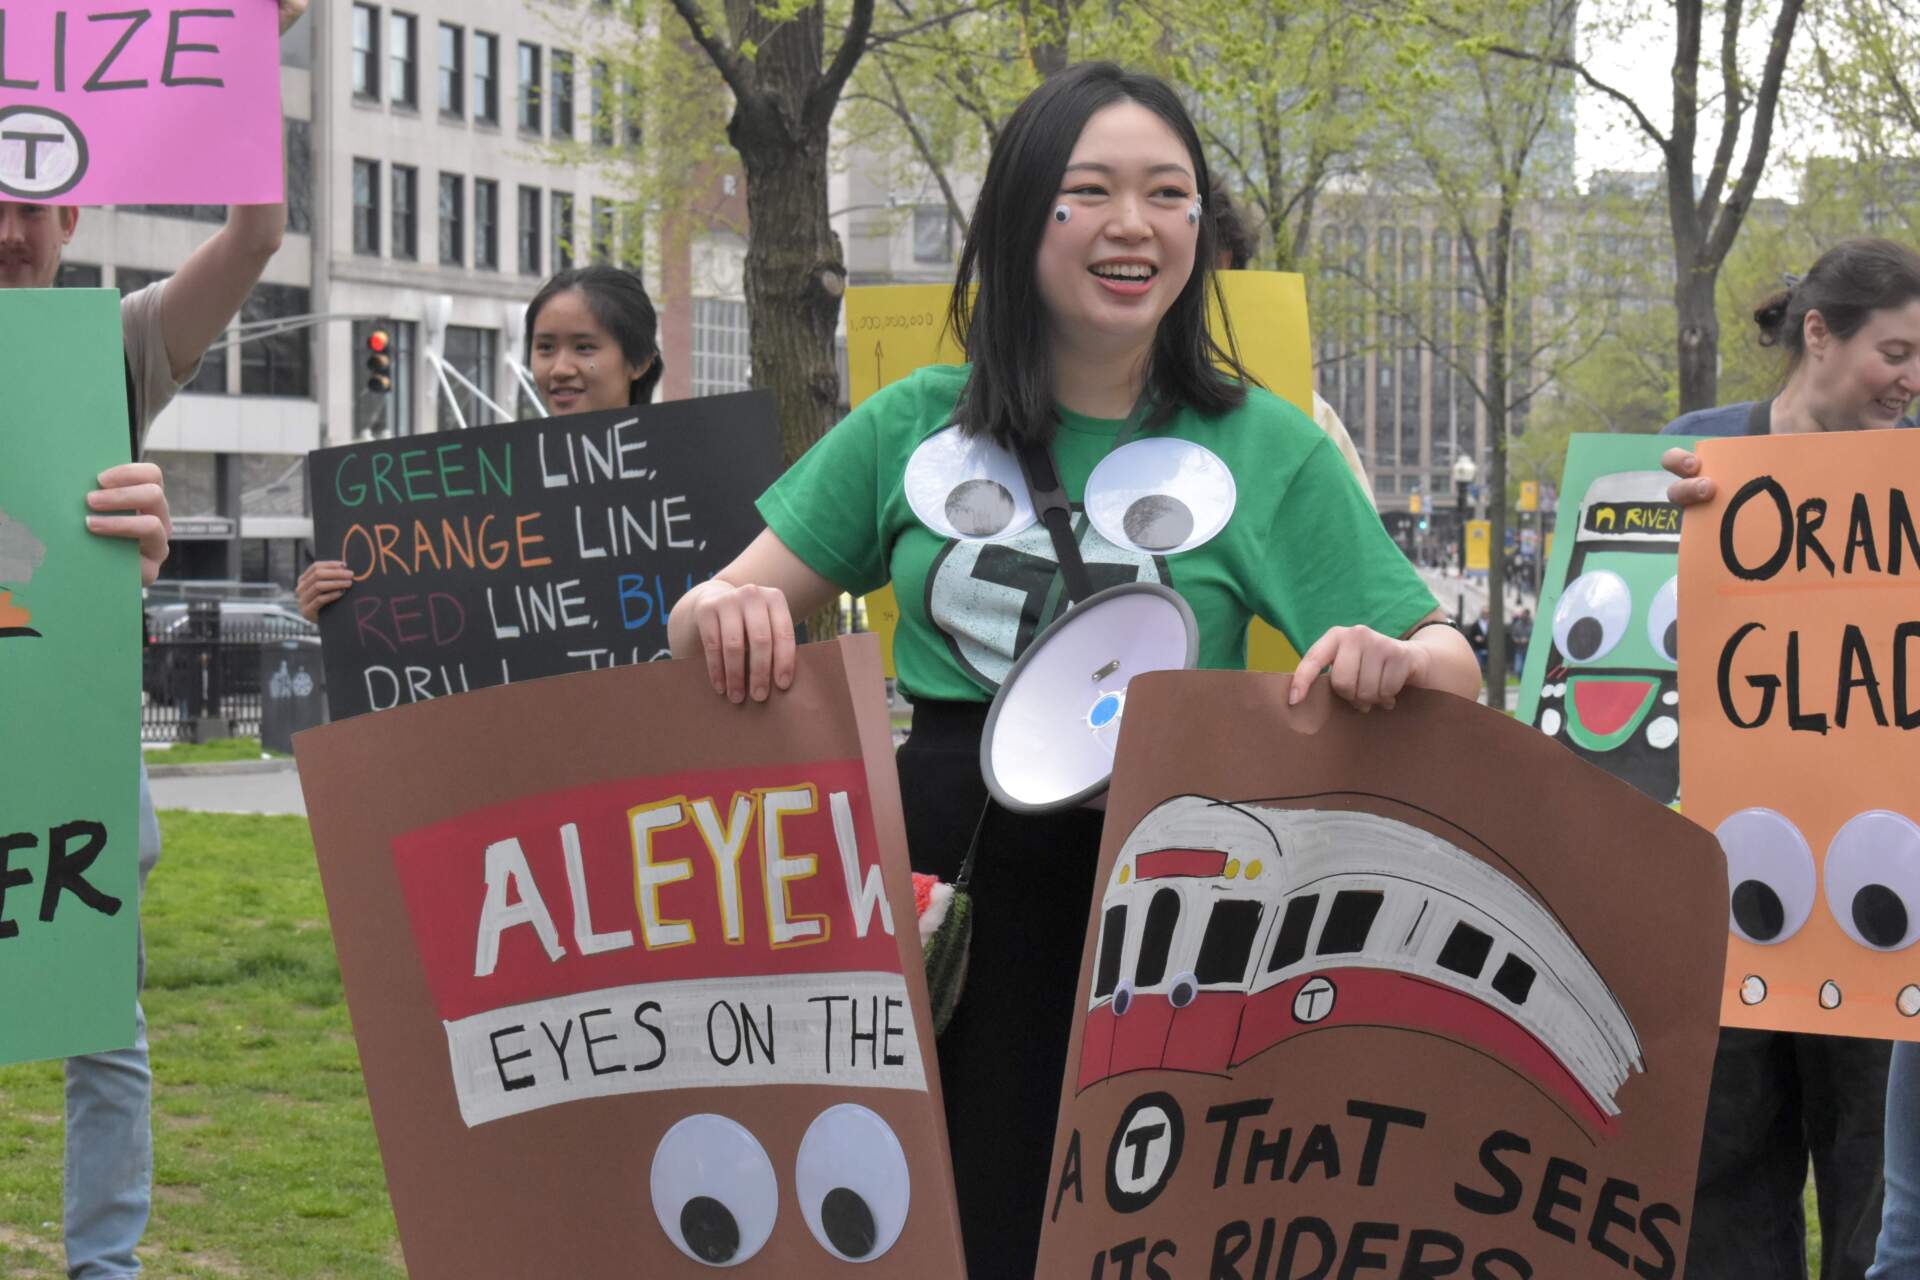 Organizer Arielle Lok holds up her signs reading &quot;ALEYEWIFE EYES ON THE T&quot; and &quot;A T that sees its riders.&quot; (Meghan B. Kelly/WBUR)